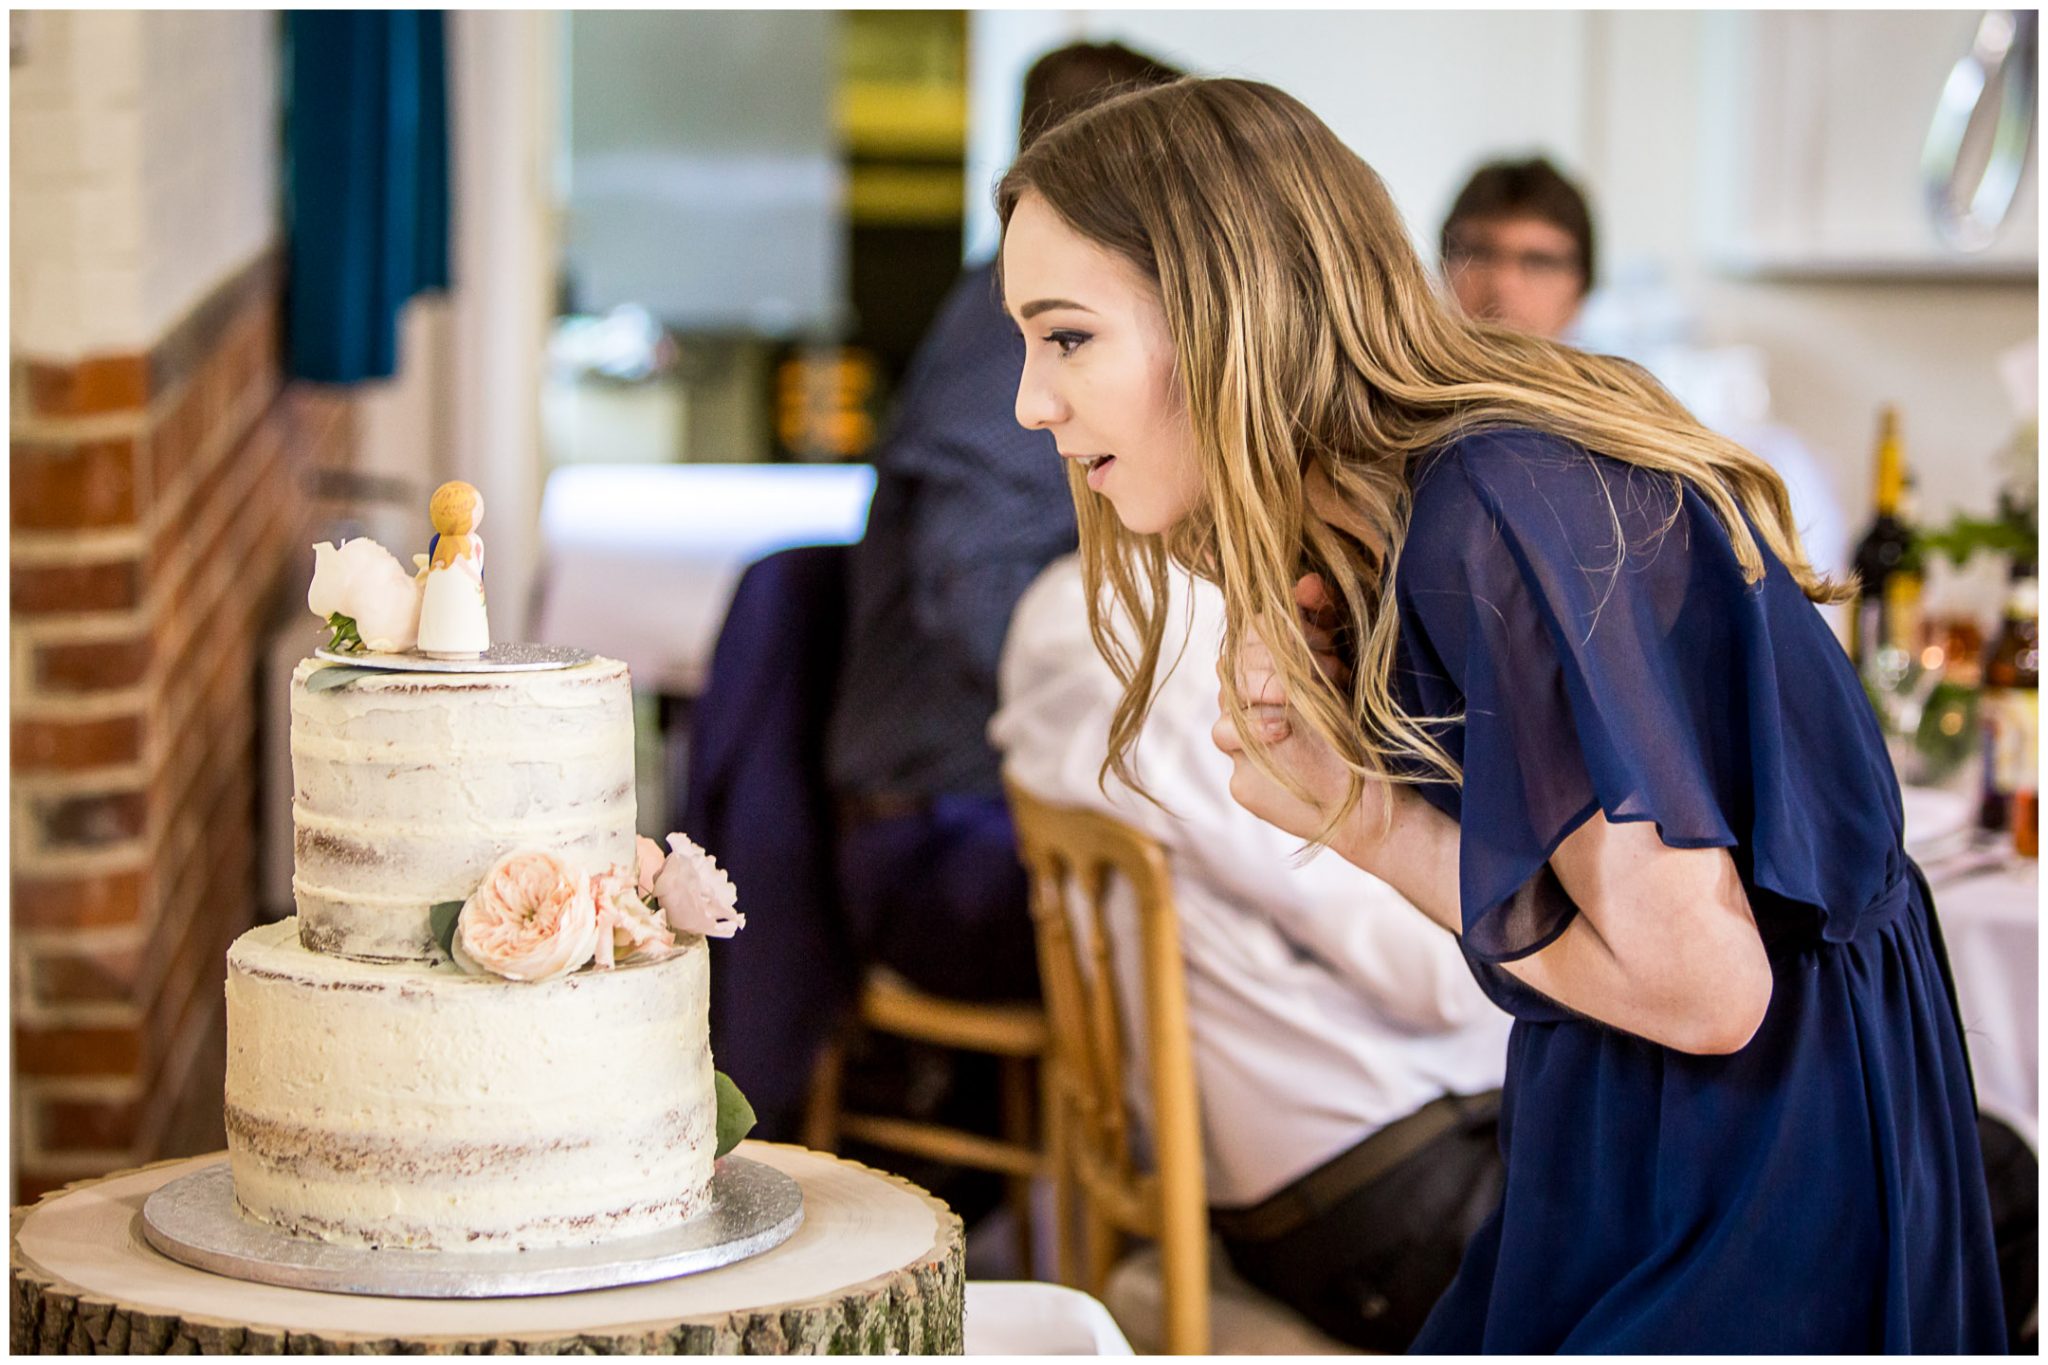 A wedding guest looks at the cake